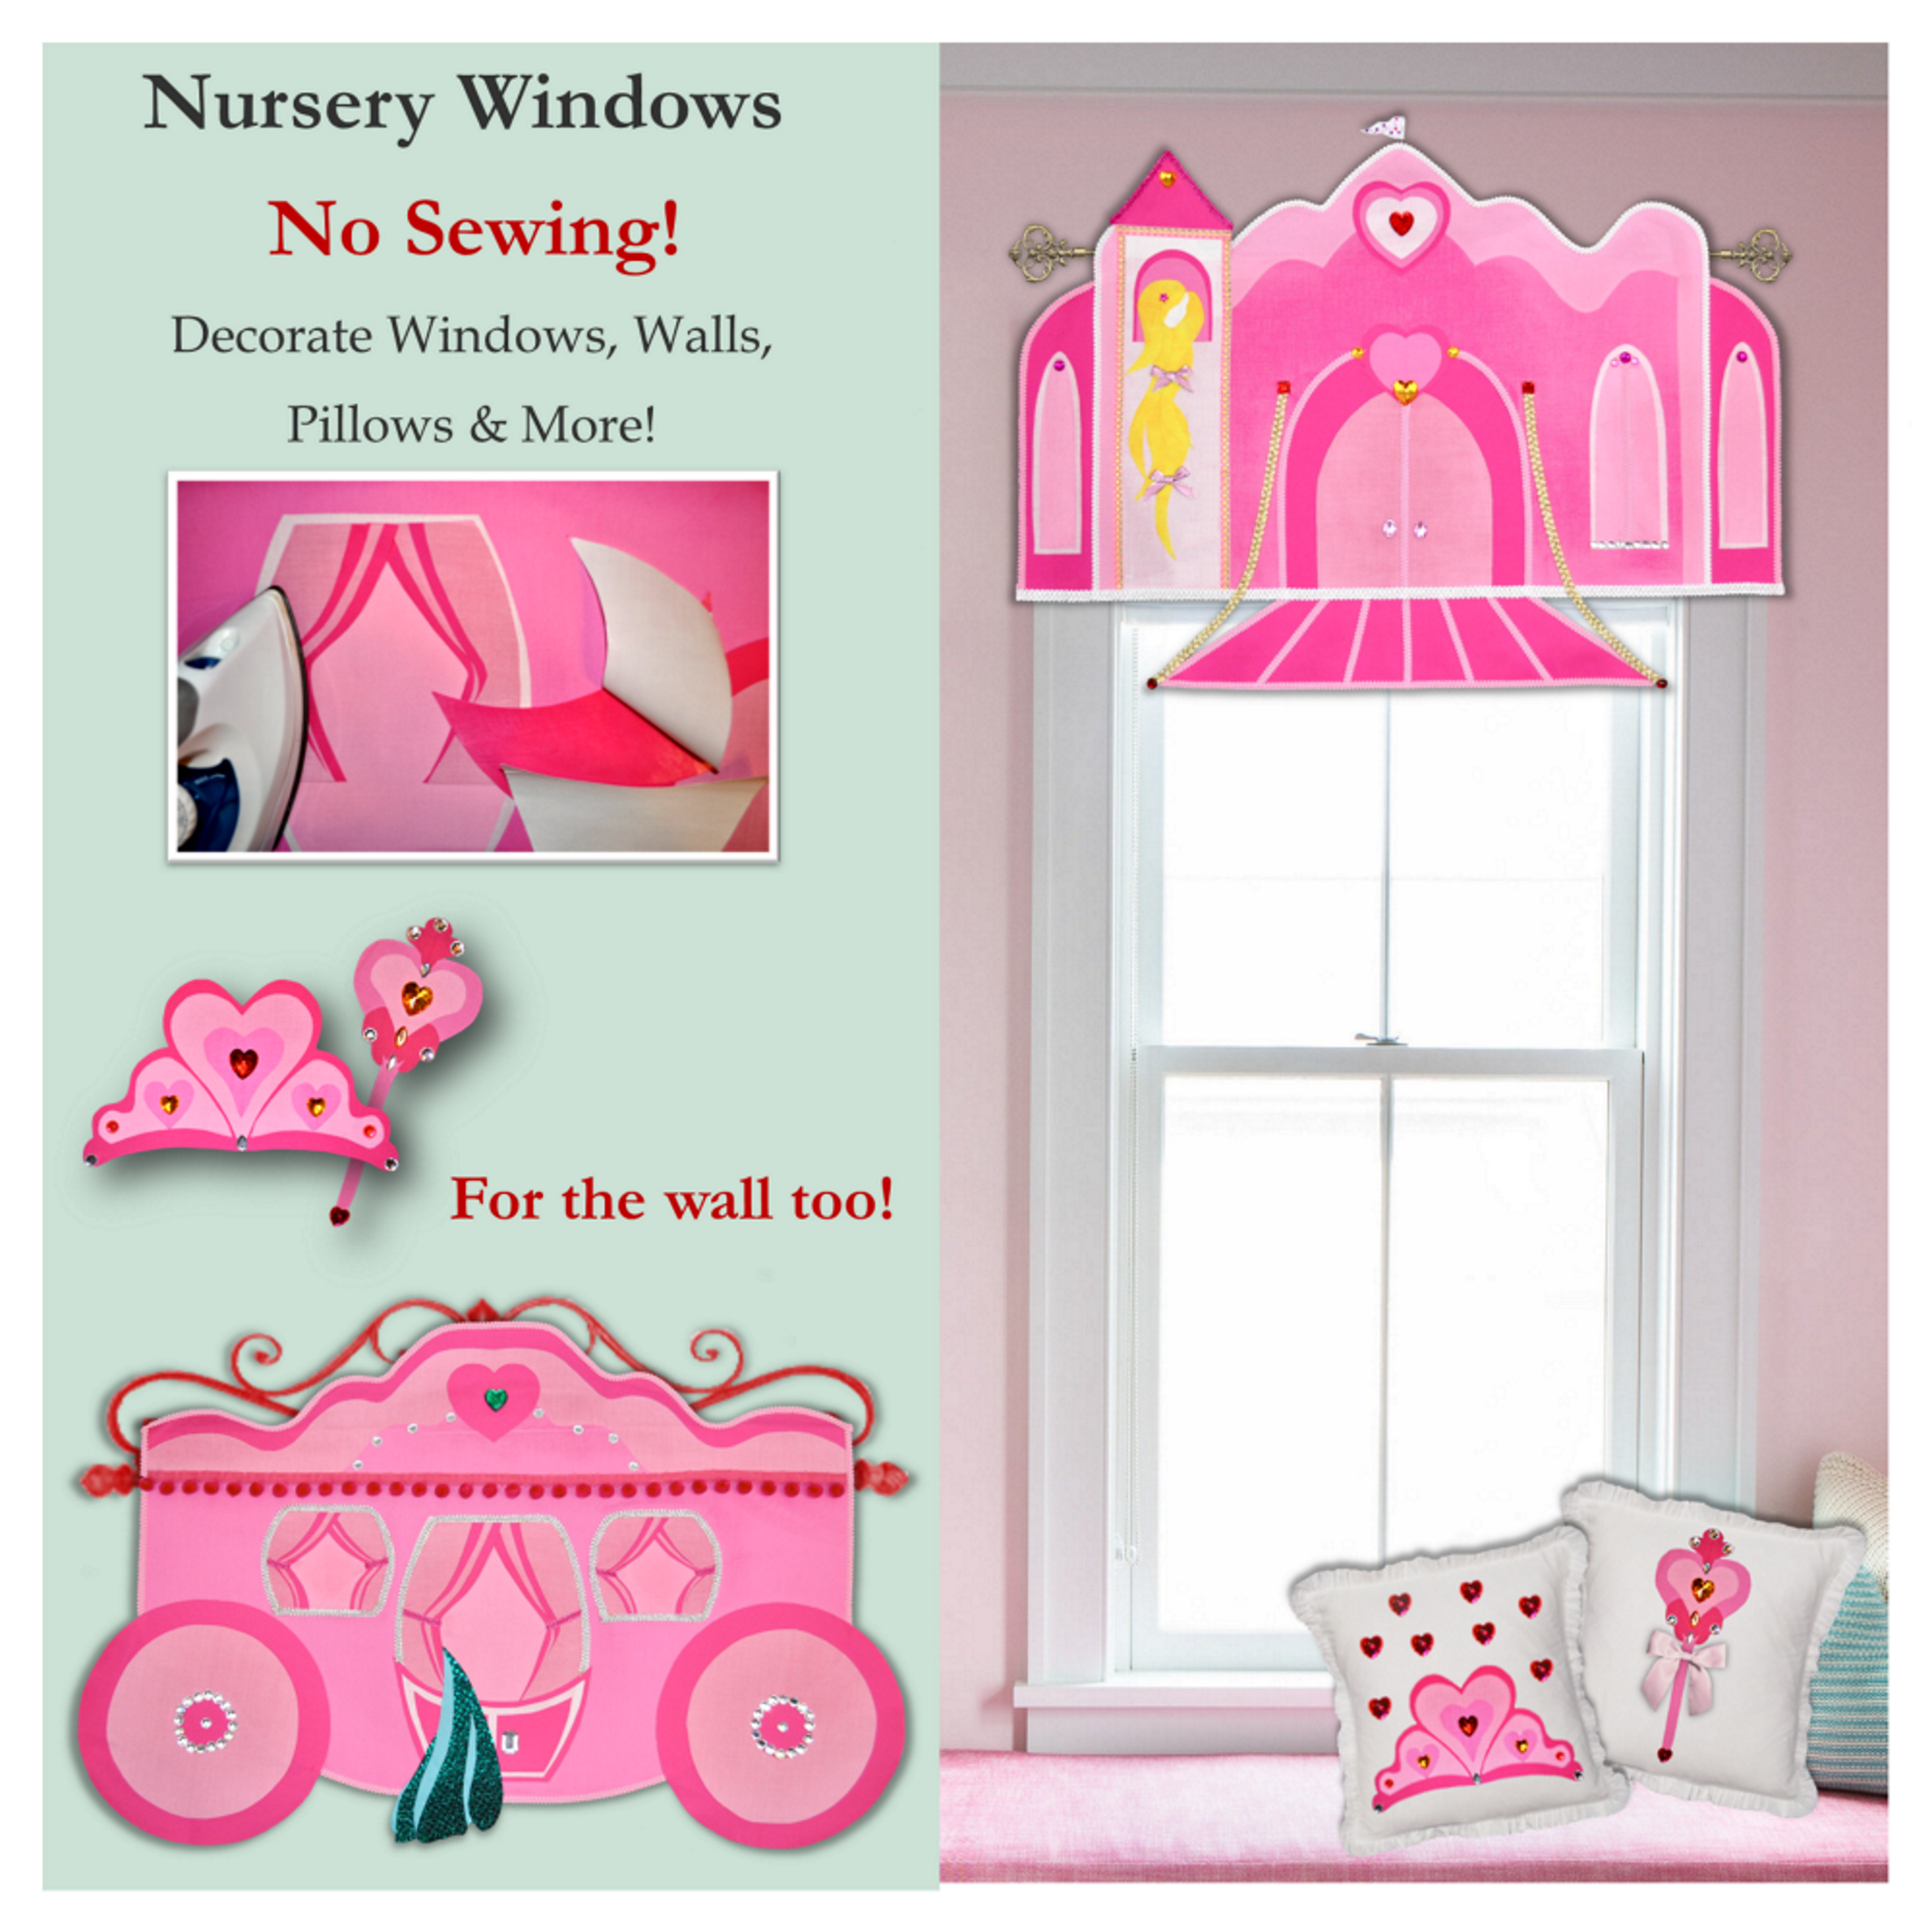 Princess valance, 3D castle window decoration for girls room, includes palace and carriage, no sewing.  Designed by Linda Schurr